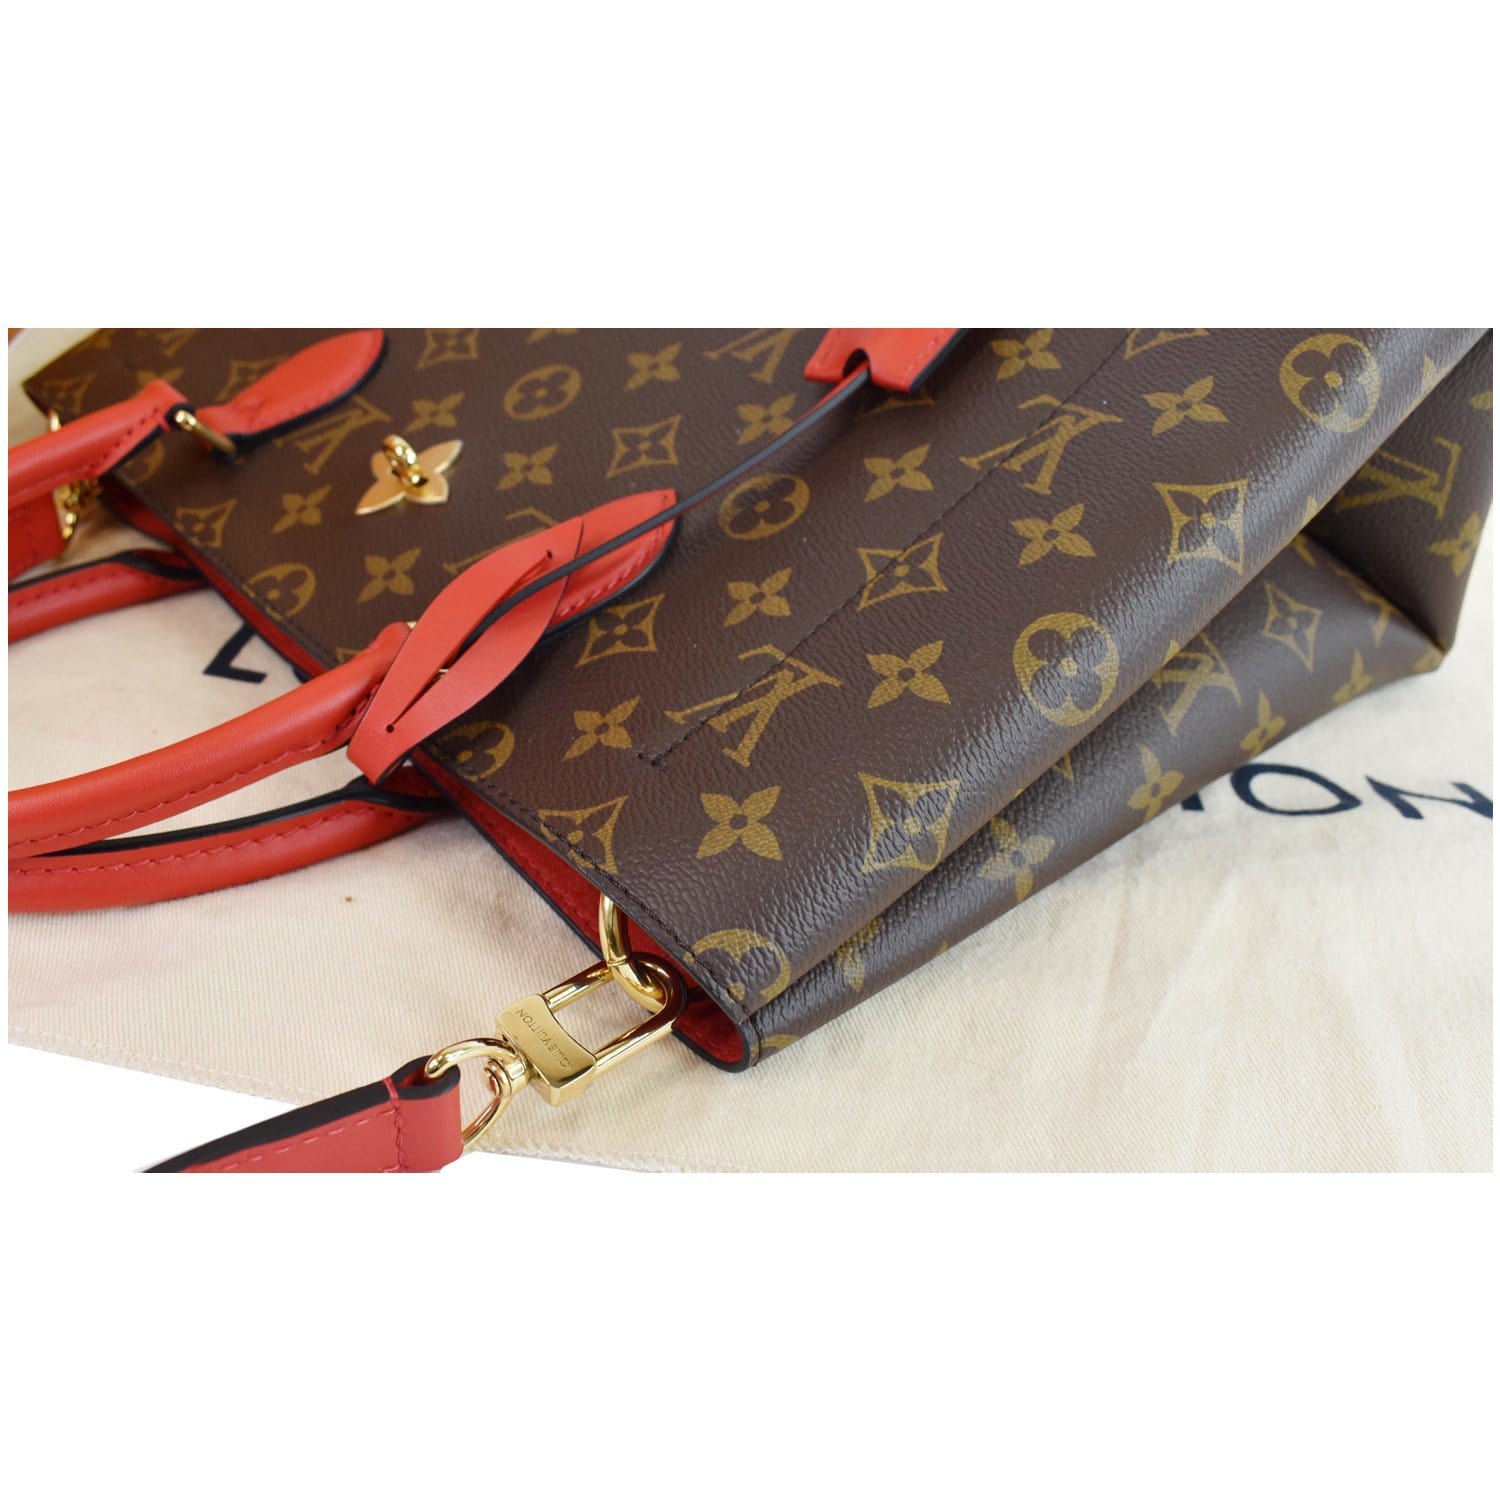 louis vuitton purse with red inside